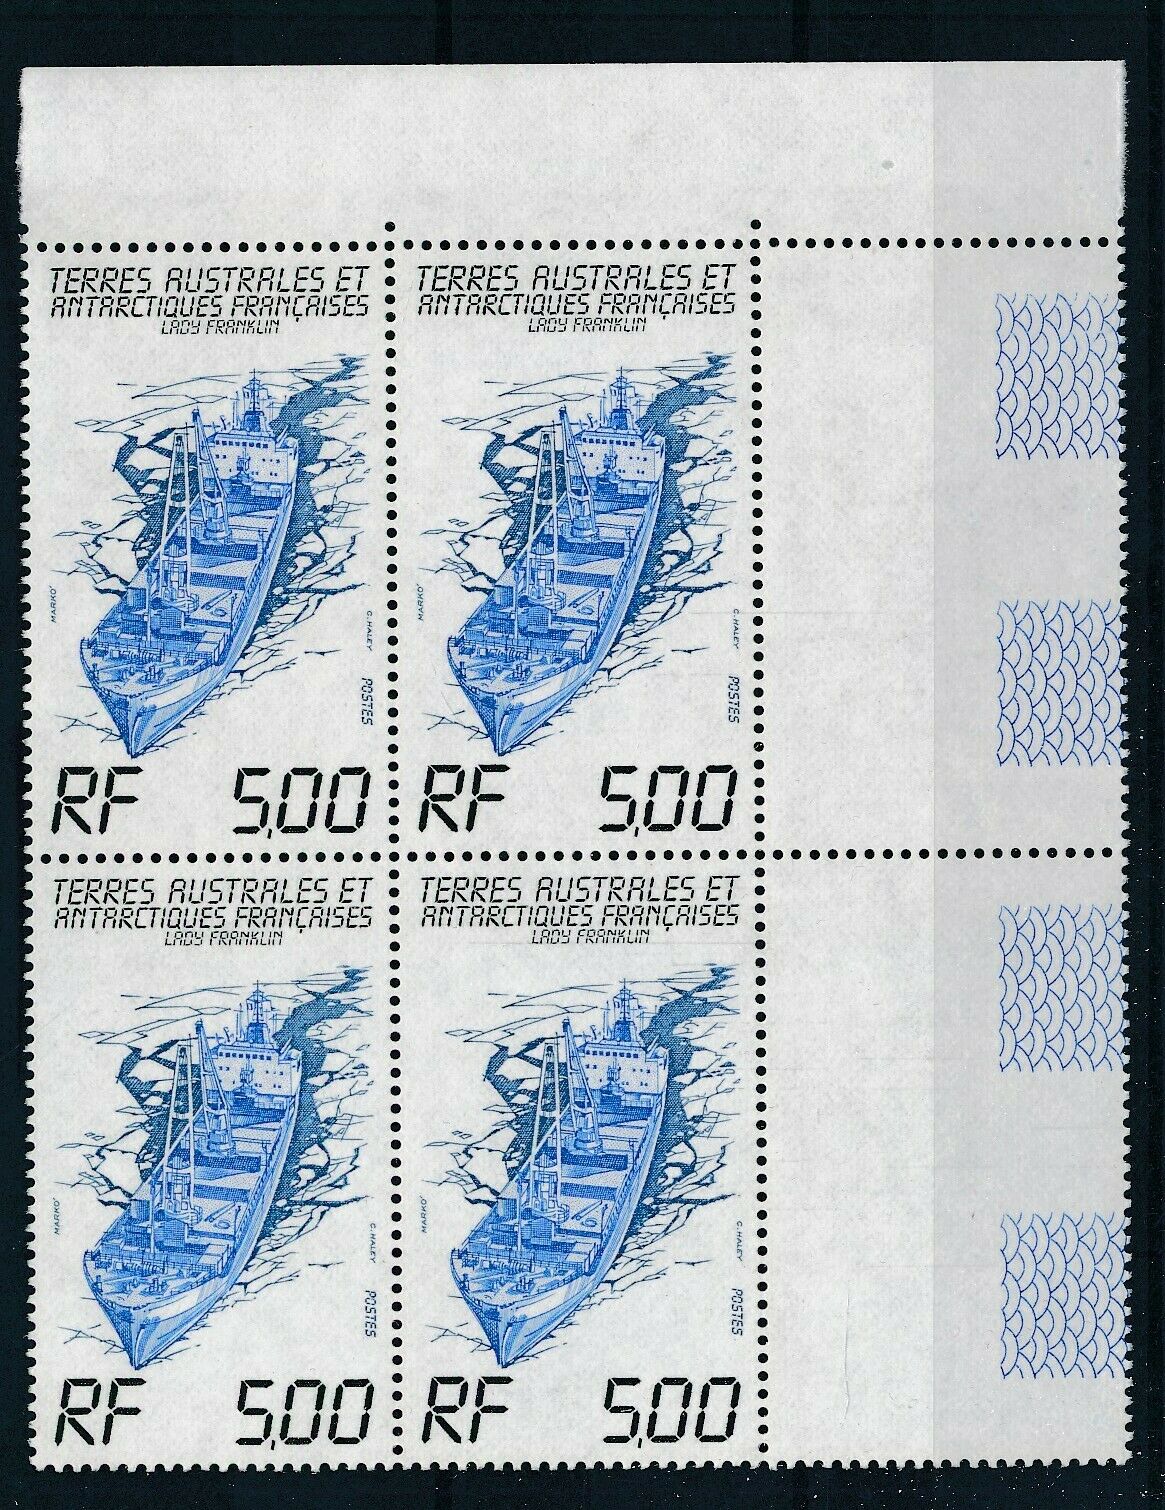 [335873] Y.A.A.F boat good block of 4 very fine MNH stamp